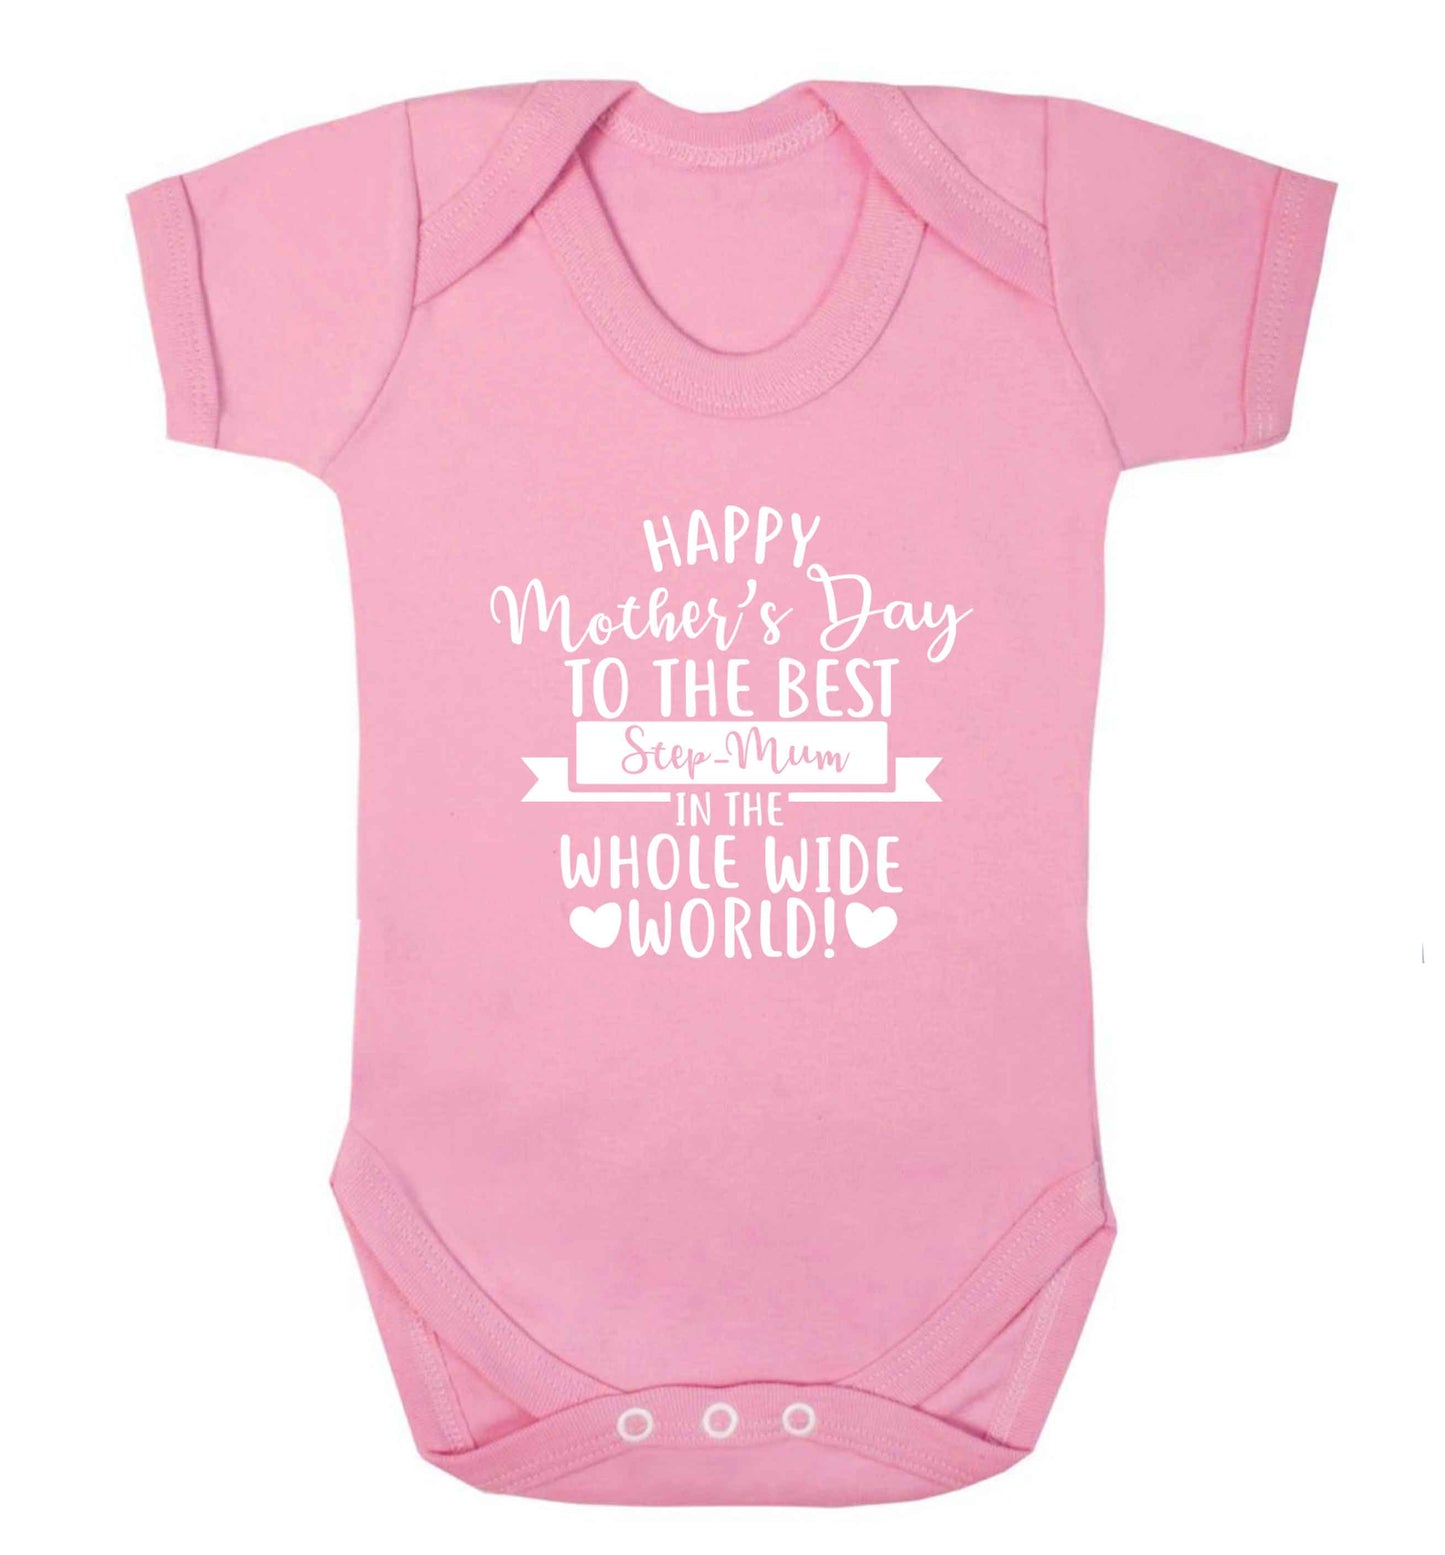 Happy mother's day to the best step-mum in the world baby vest pale pink 18-24 months